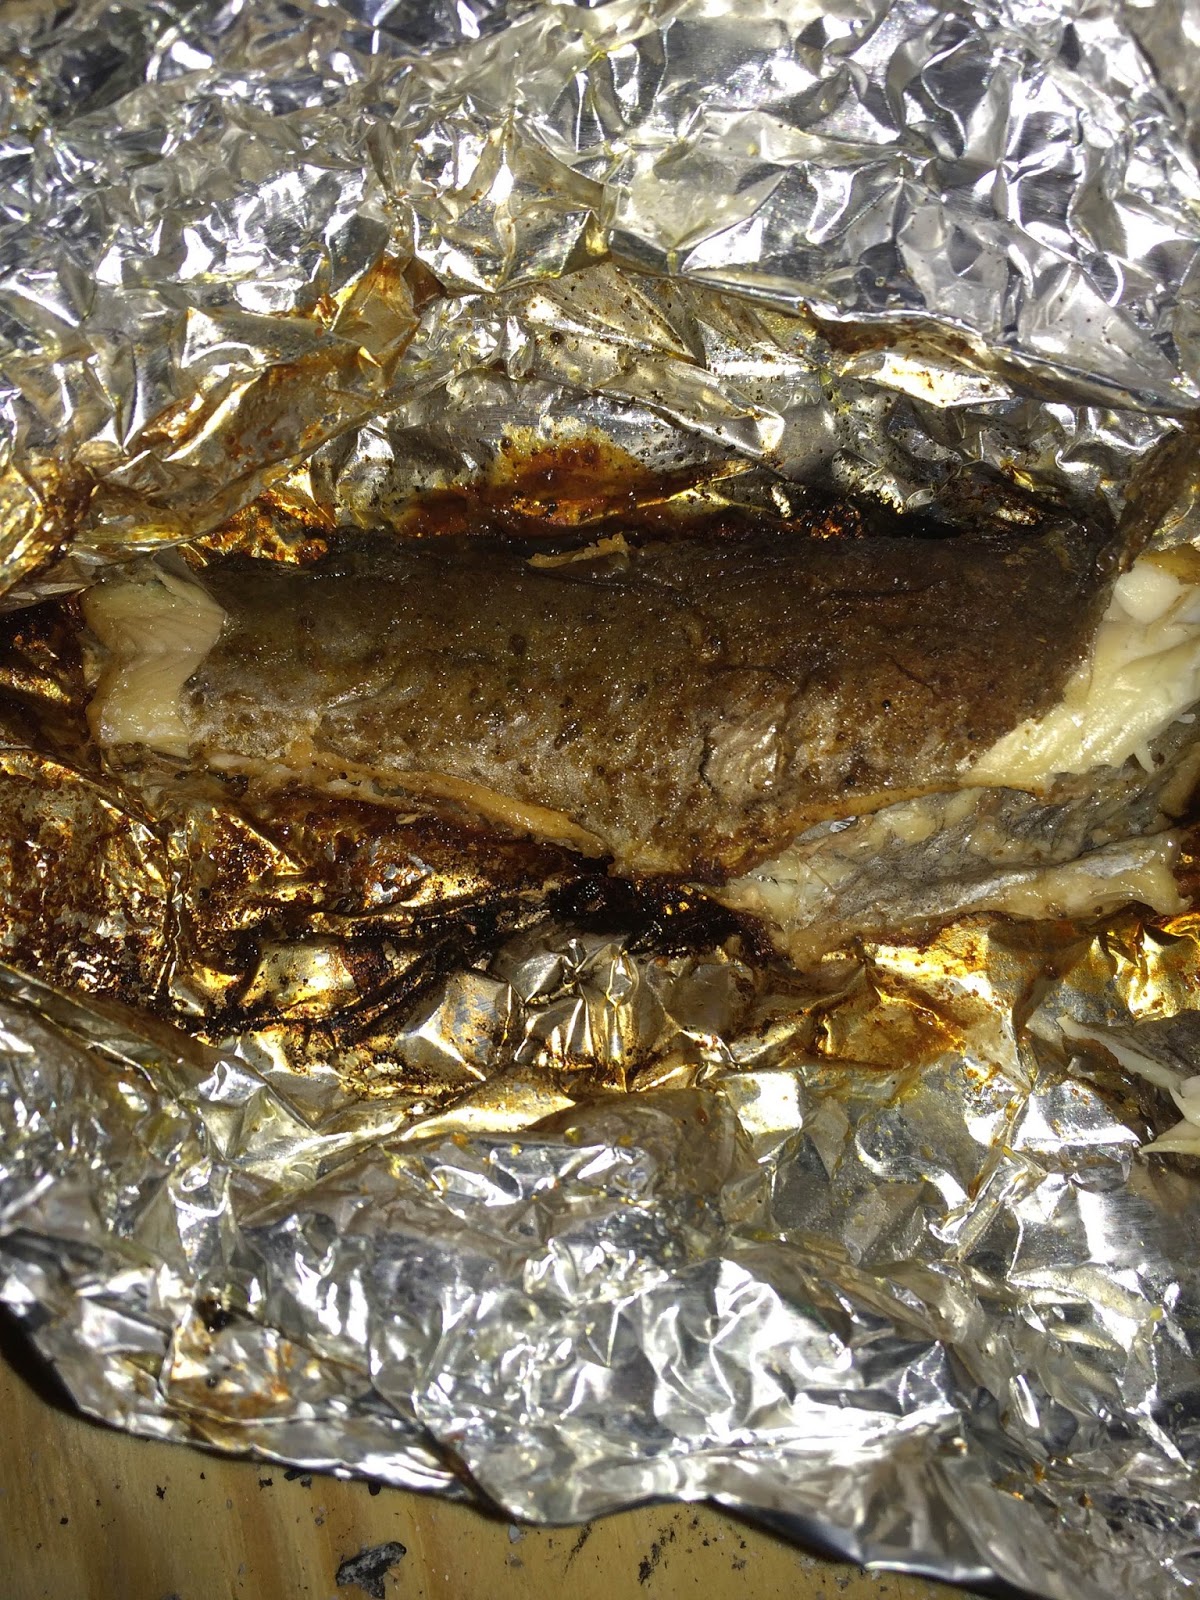 The 7 P's Blog: Outdoor Cooking: Preparing Trout and Recipes to Try